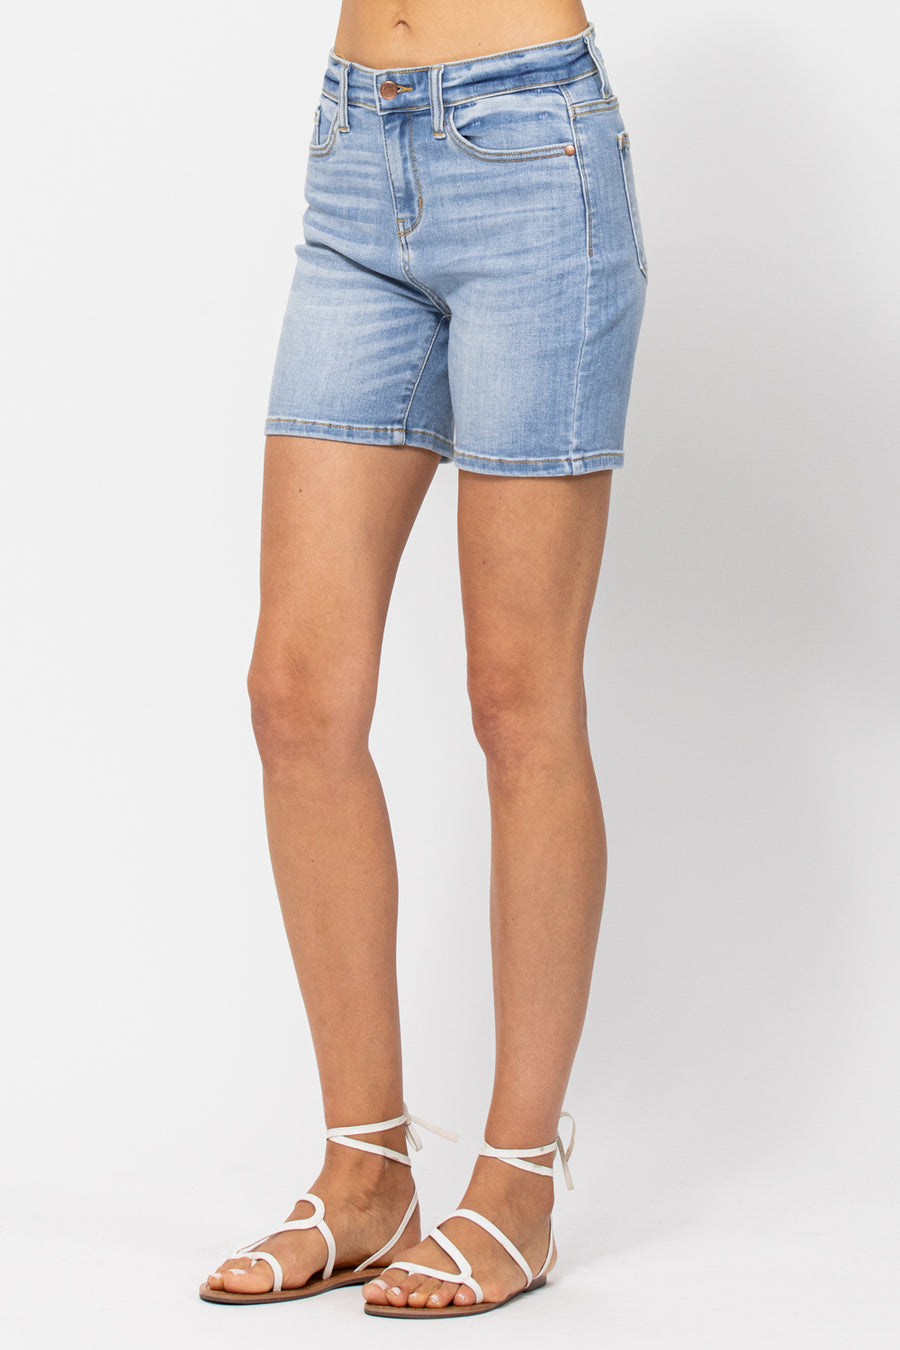 Indie Mid Length Shorts